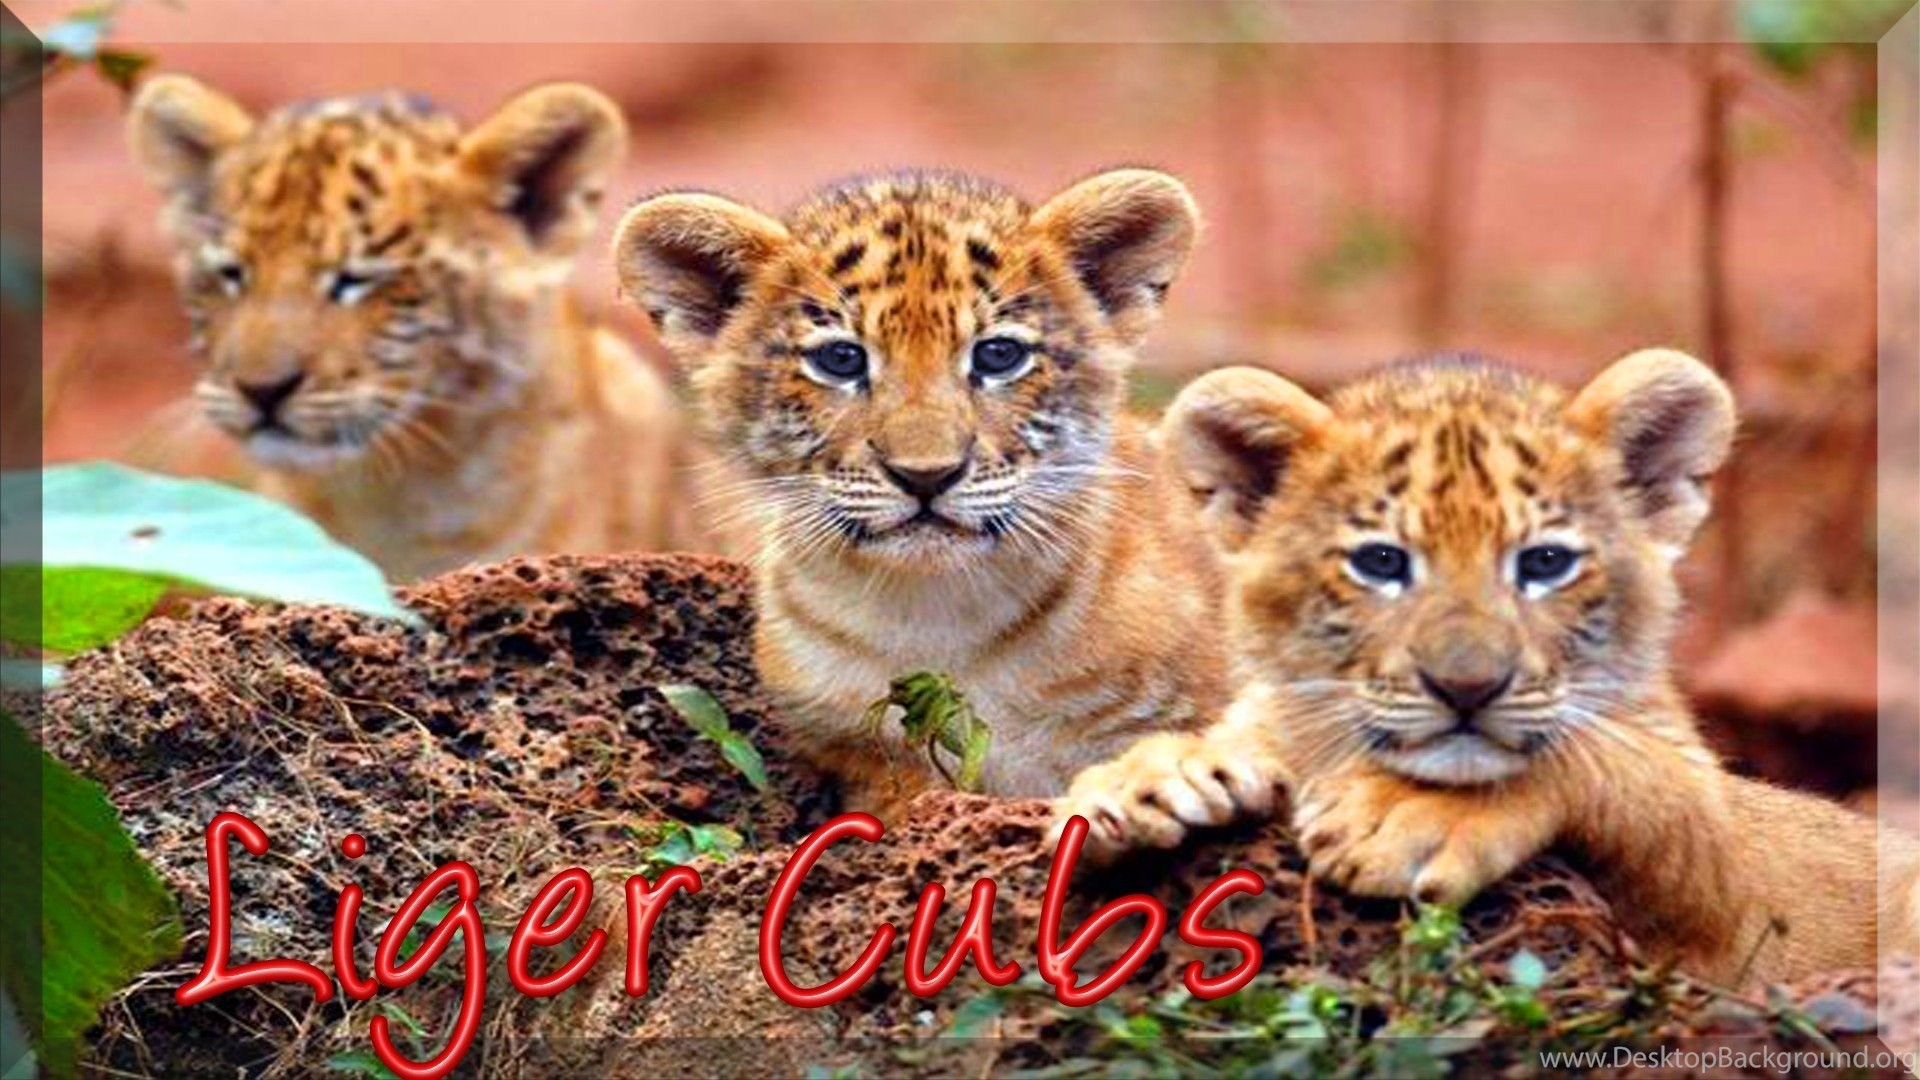 1920x1080 Liger Zero Schneider by skipaway Source Â· Liger Cubs Animal Lion Animals  Cats Ligers Tiger Other Wallpapers